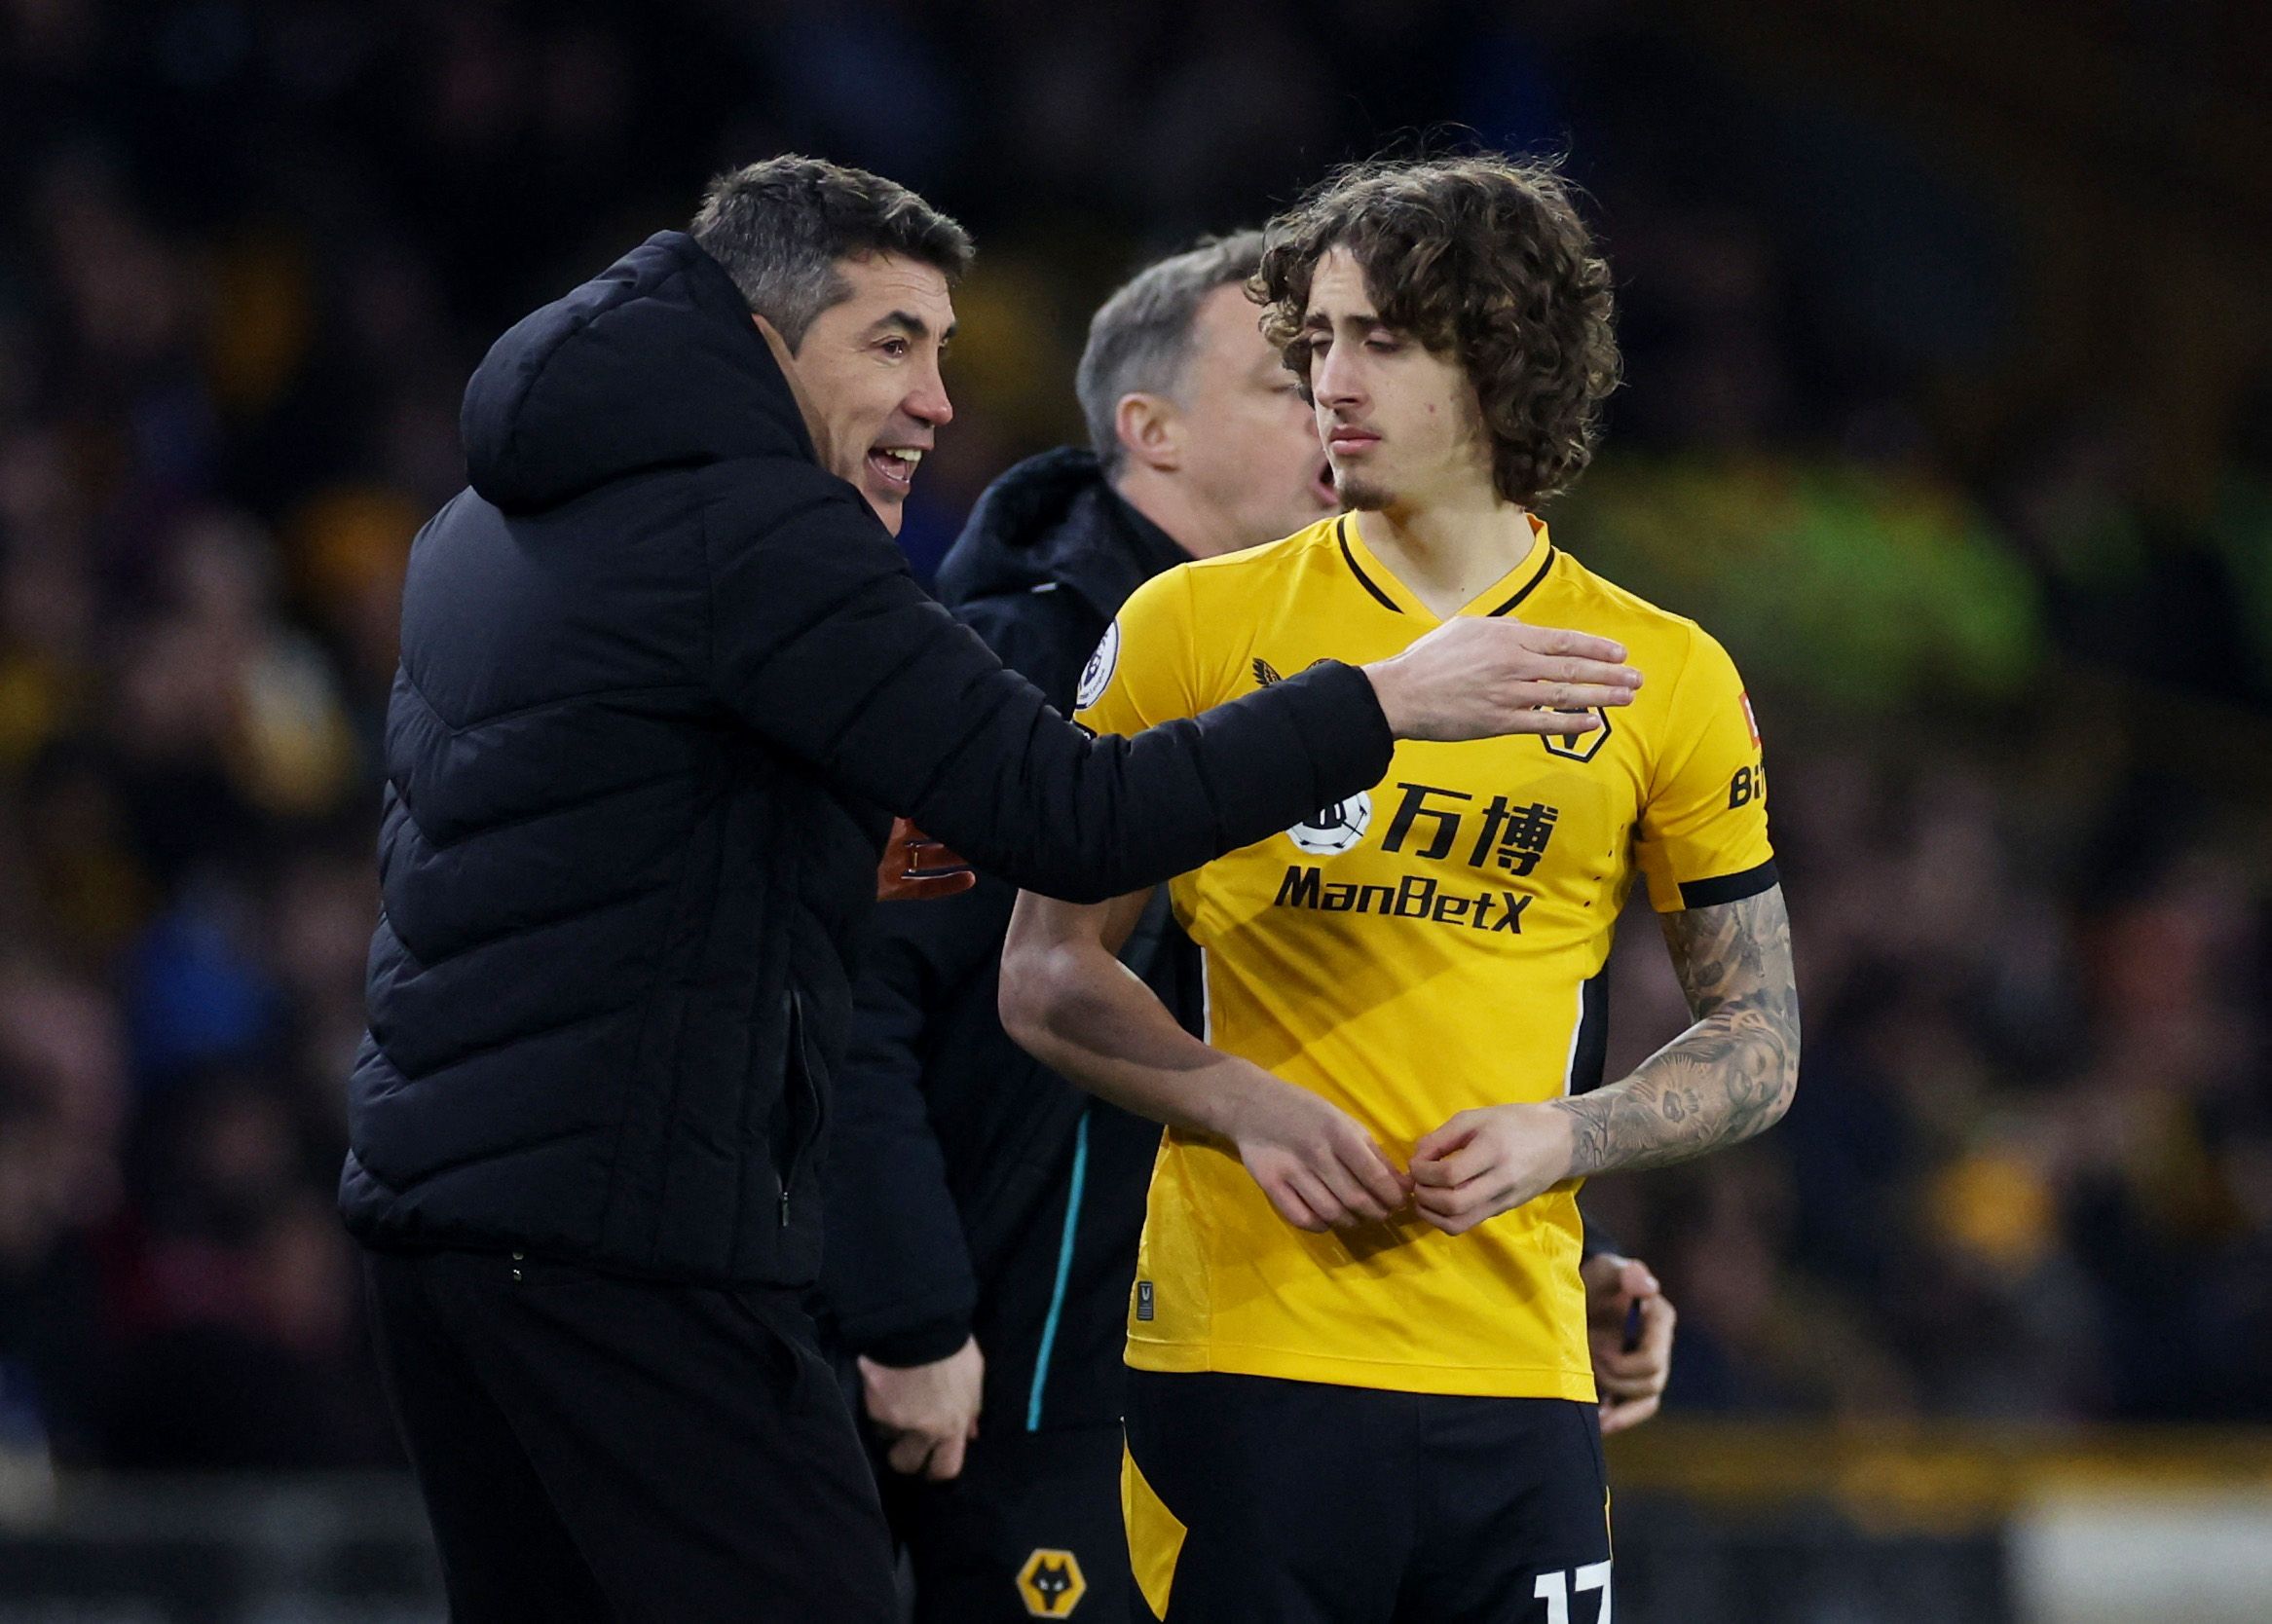 Soccer Football - Premier League - Wolverhampton Wanderers v Watford - Molineux Stadium, Wolverhampton, Britain - March 10, 2022 Wolverhampton Wanderers manager Bruno Lage prepares to substitute on Wolverhampton Wanderers' Fabio Silva Action Images via Reuters/Paul Childs EDITORIAL USE ONLY. No use with unauthorized audio, video, data, fixture lists, club/league logos or 'live' services. Online in-match use limited to 75 images, no video emulation. No use in betting, games or single club /league